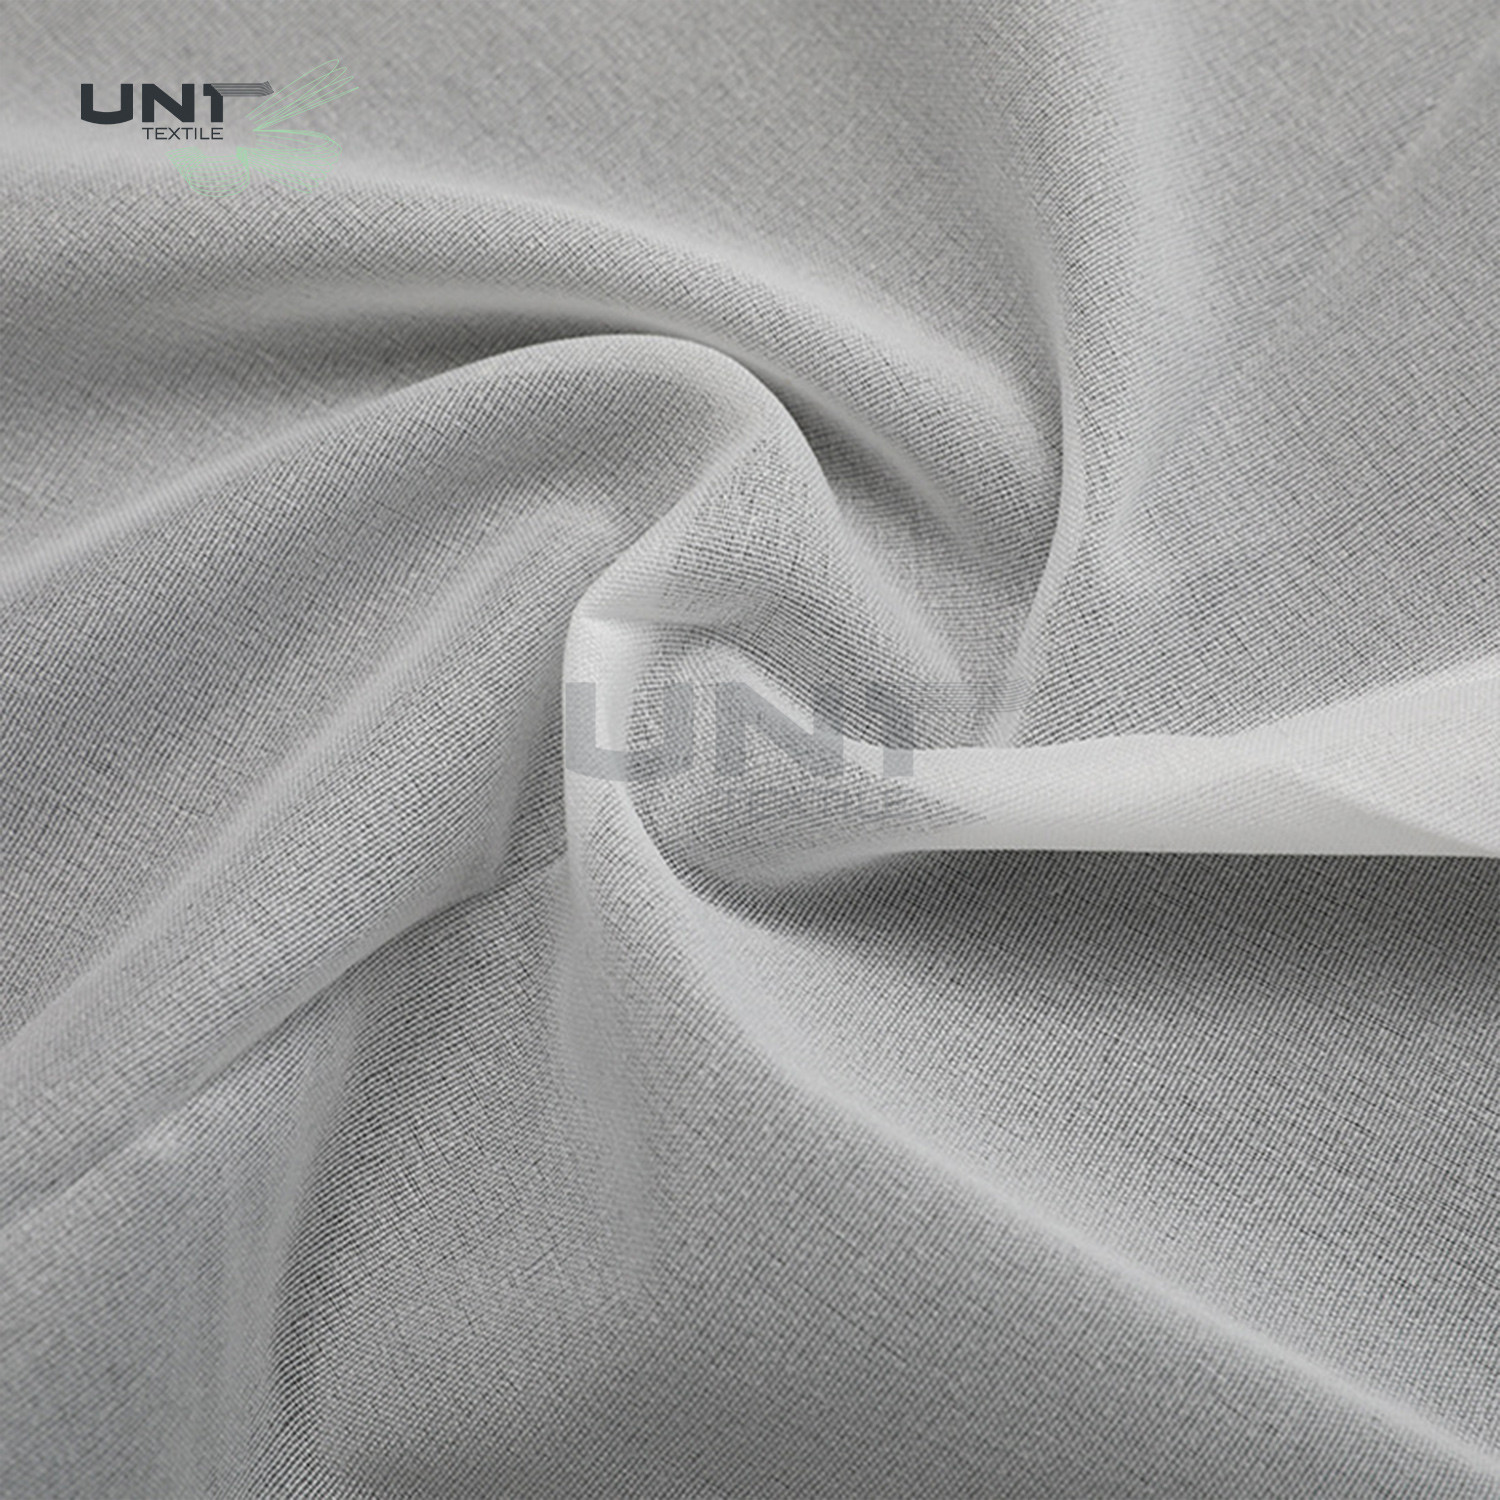 China Durability Polyester Woven Interlining For Mens Suit Heavy Fabric factory